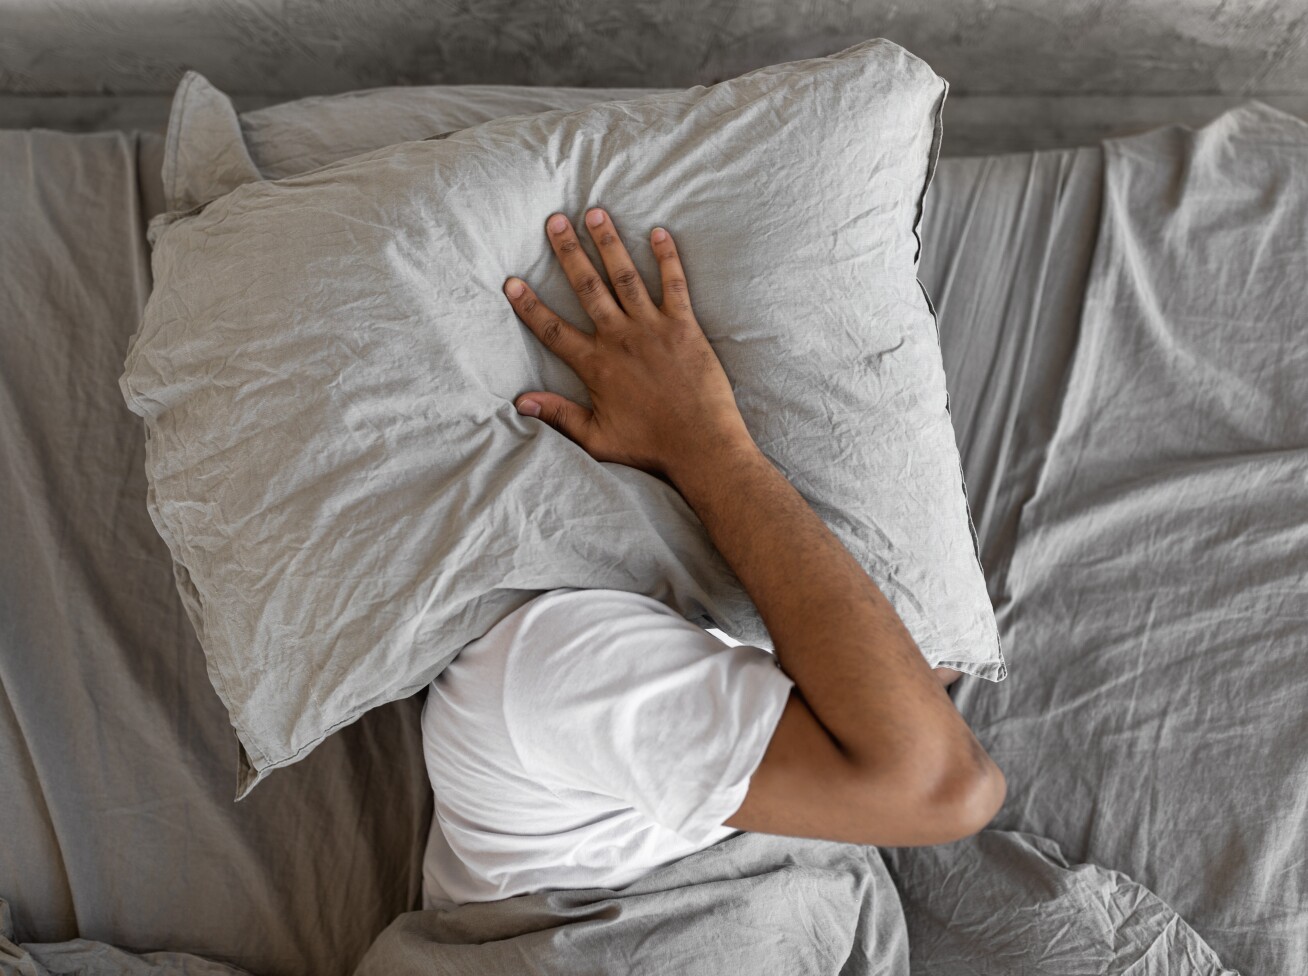 A man has a pillow over his head in bed because it is too loud